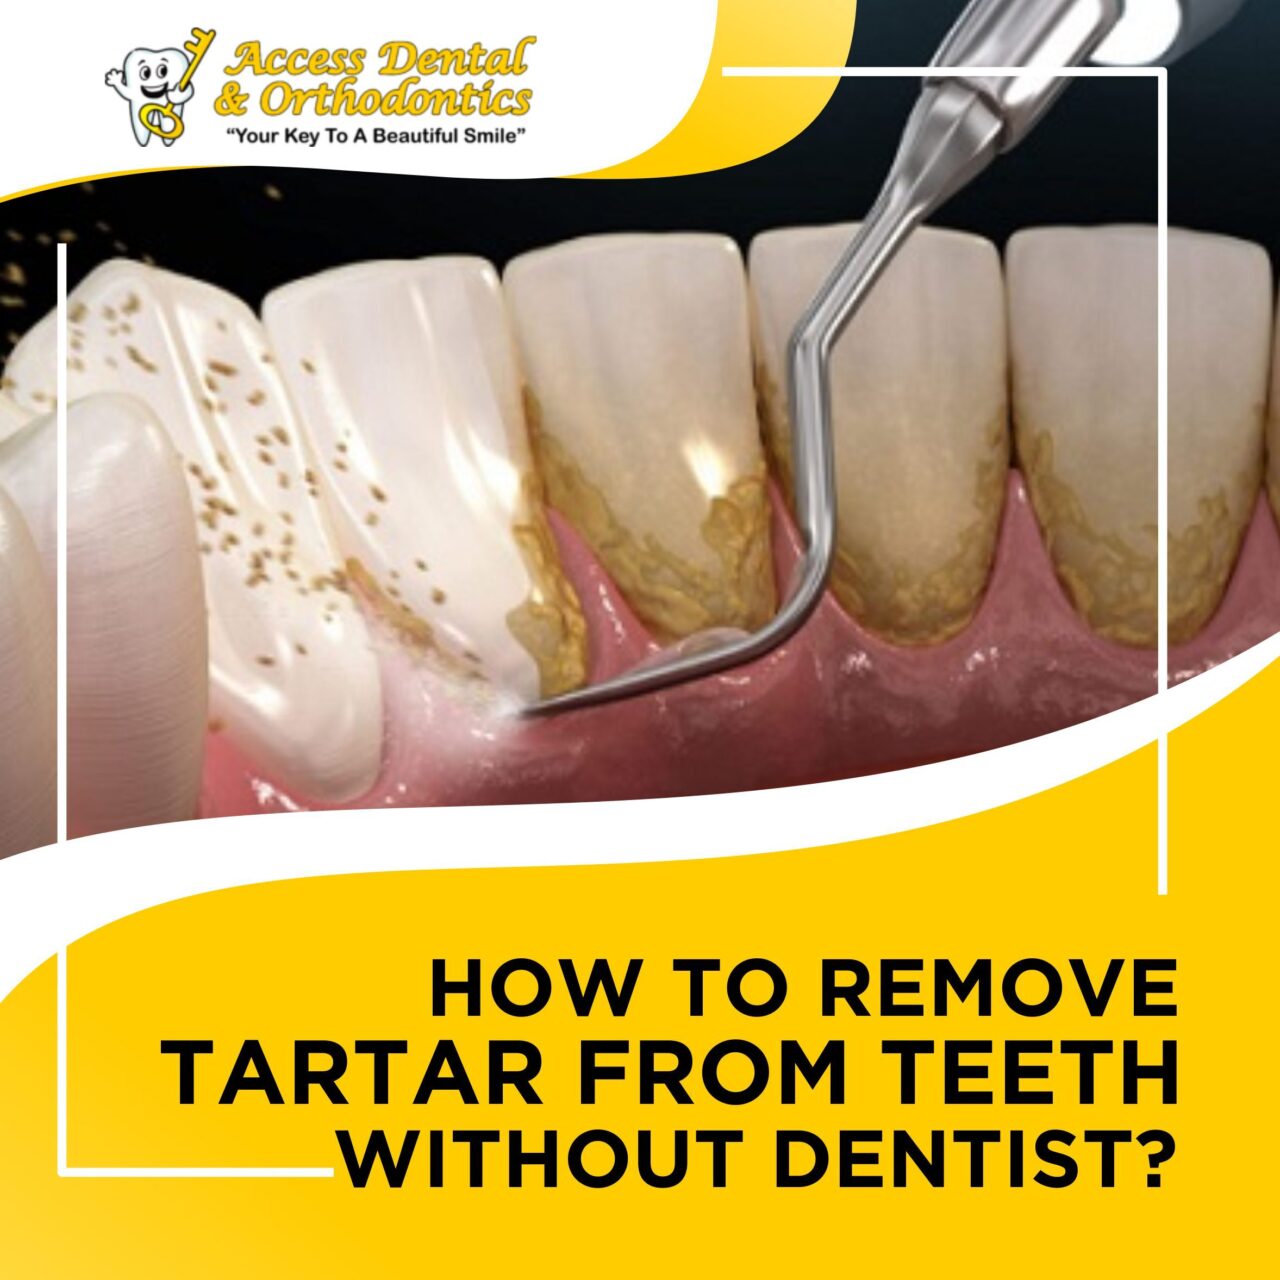 How To Remove Plaque And Tartar From Teeth Without Dentist